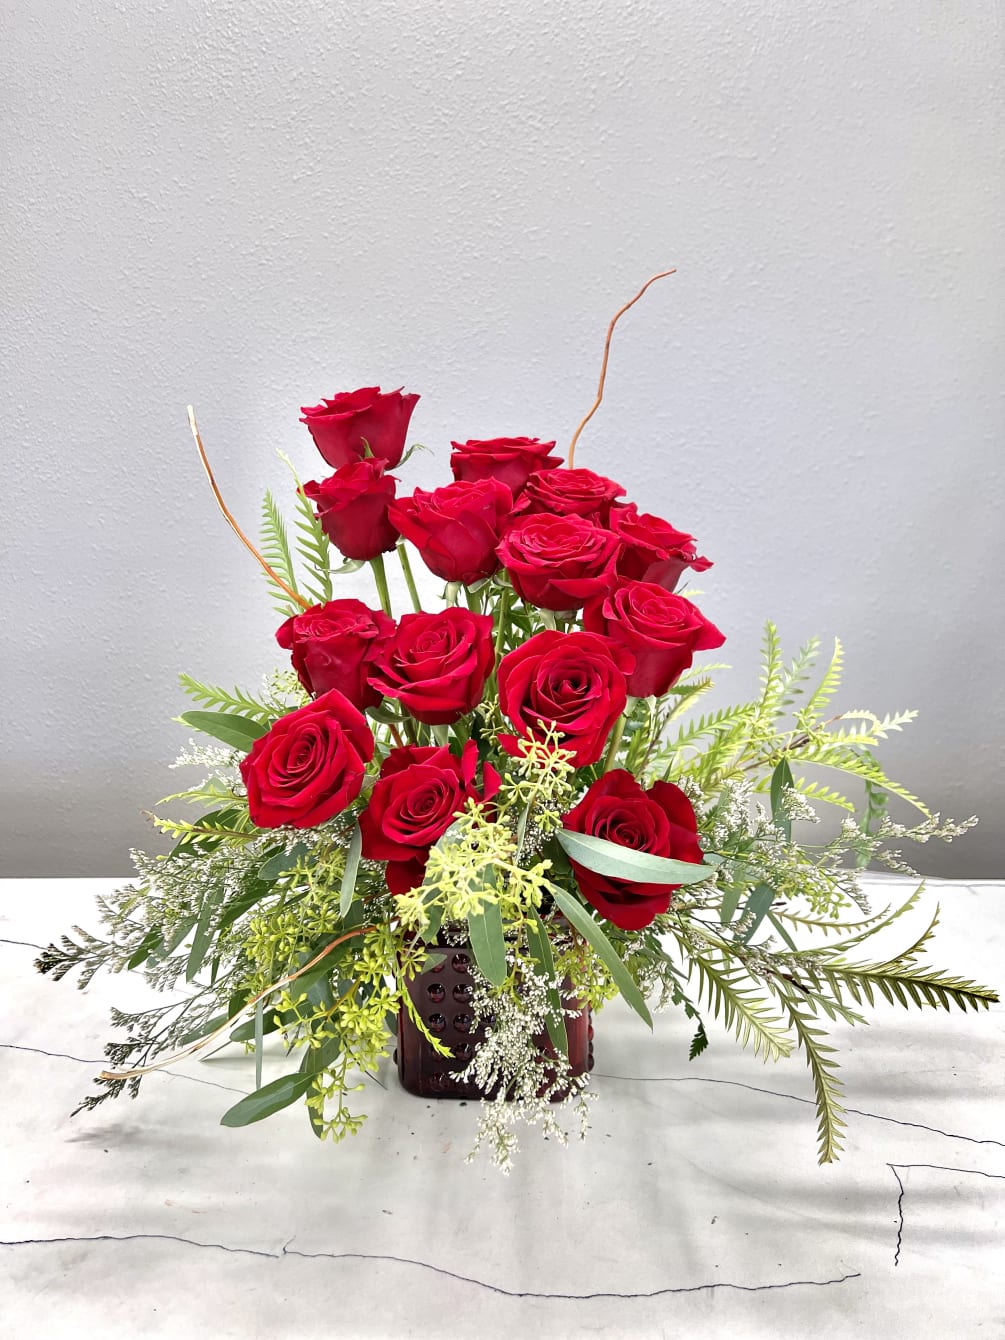 Show that you love and care for someone with red roses.